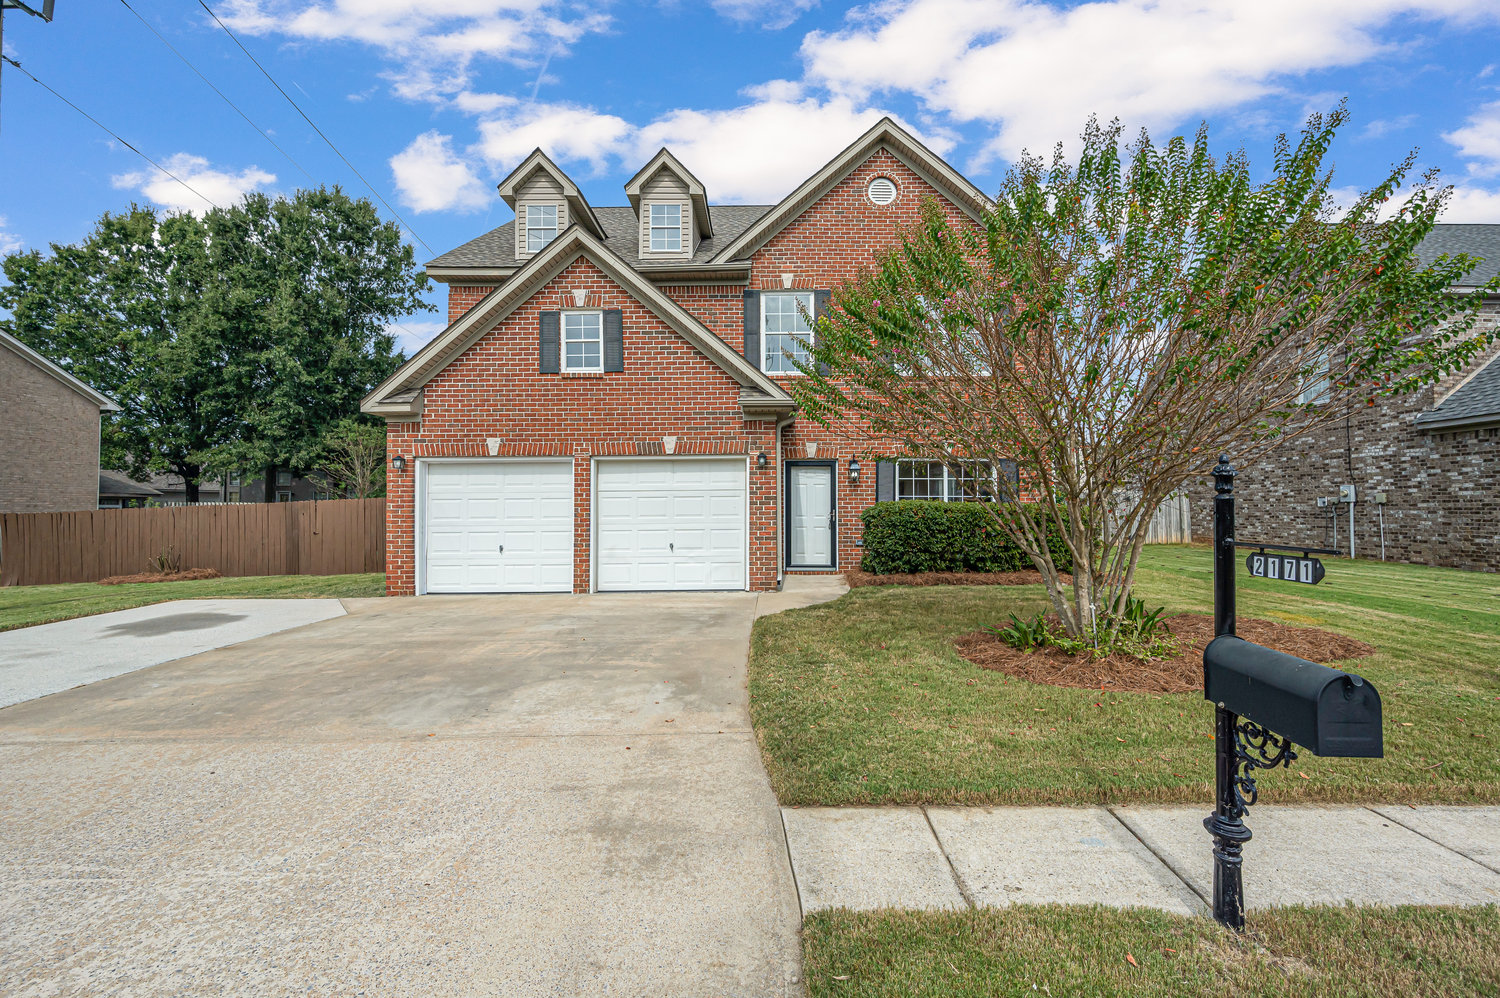 Virtual Tour of Birmingham Metro Real Estate Listing For Sale | 2171 Old Cahaba Place, Helena, AL 35080